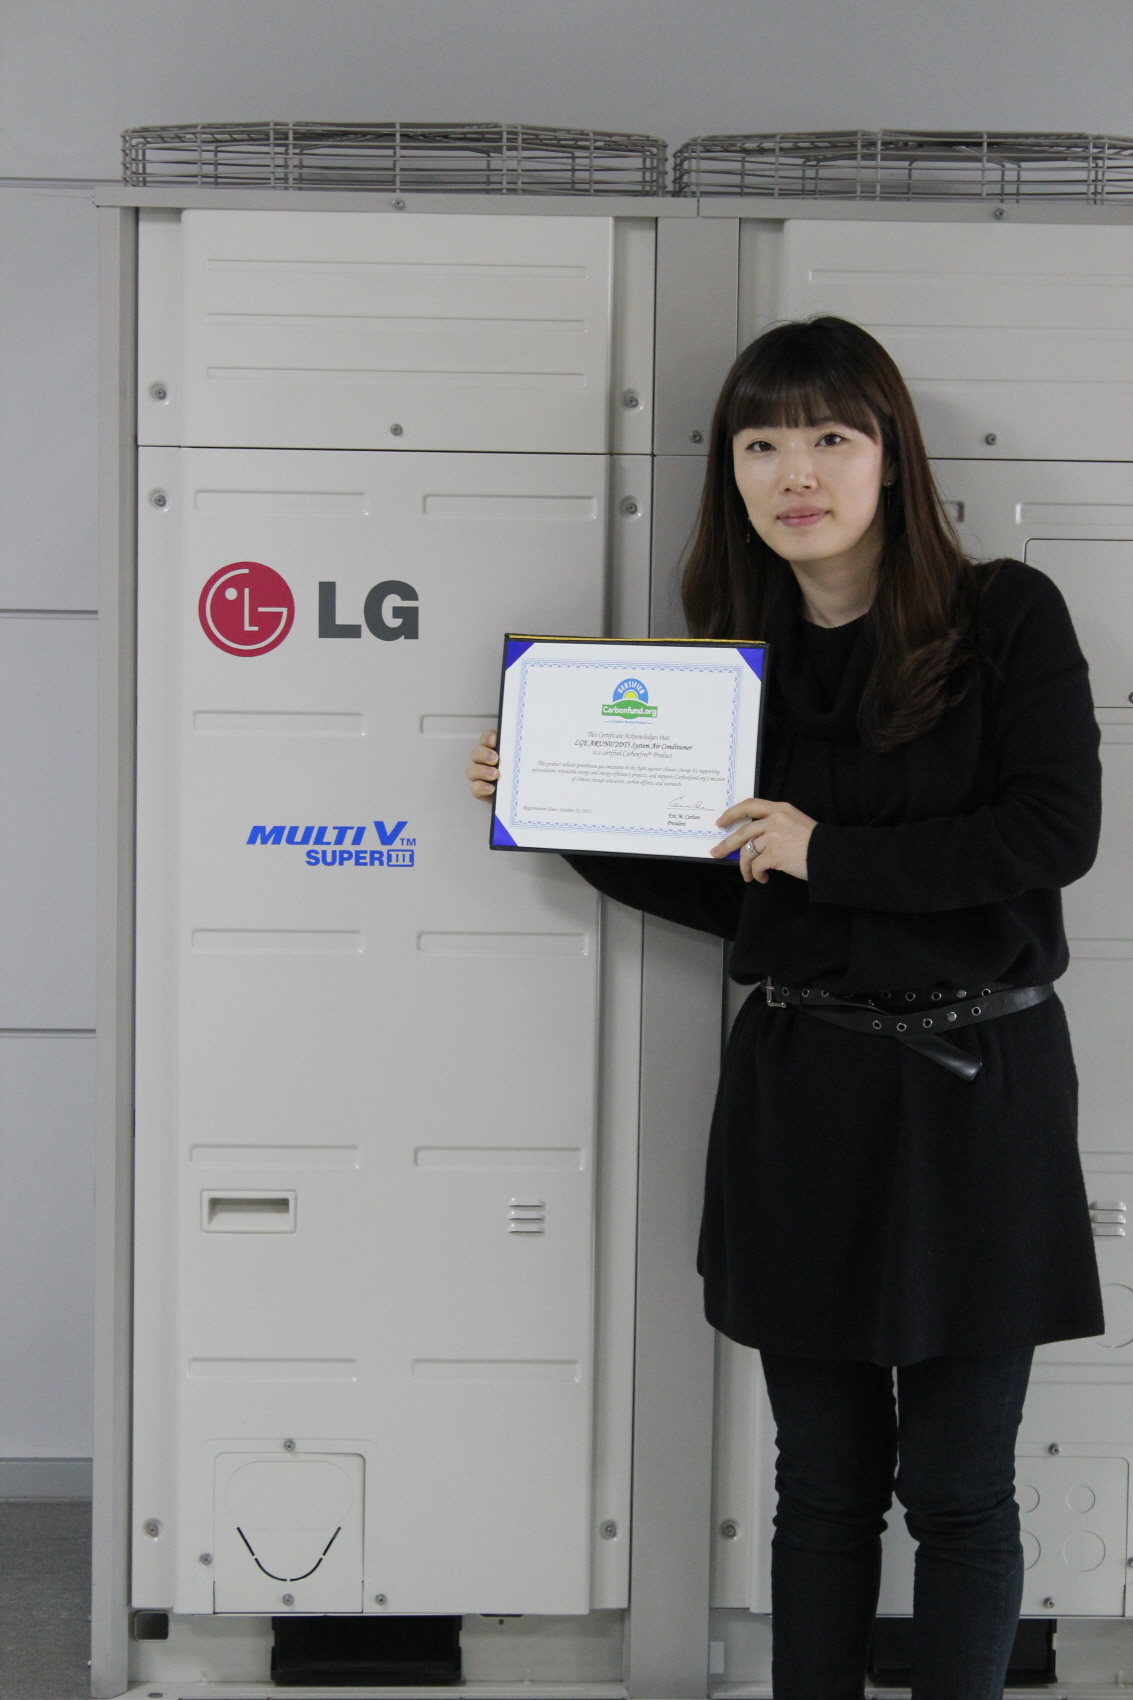 A wider shot of a woman holding up LG MULTI V III’s carbon-free certification letter in front of the air conditioner appliance.